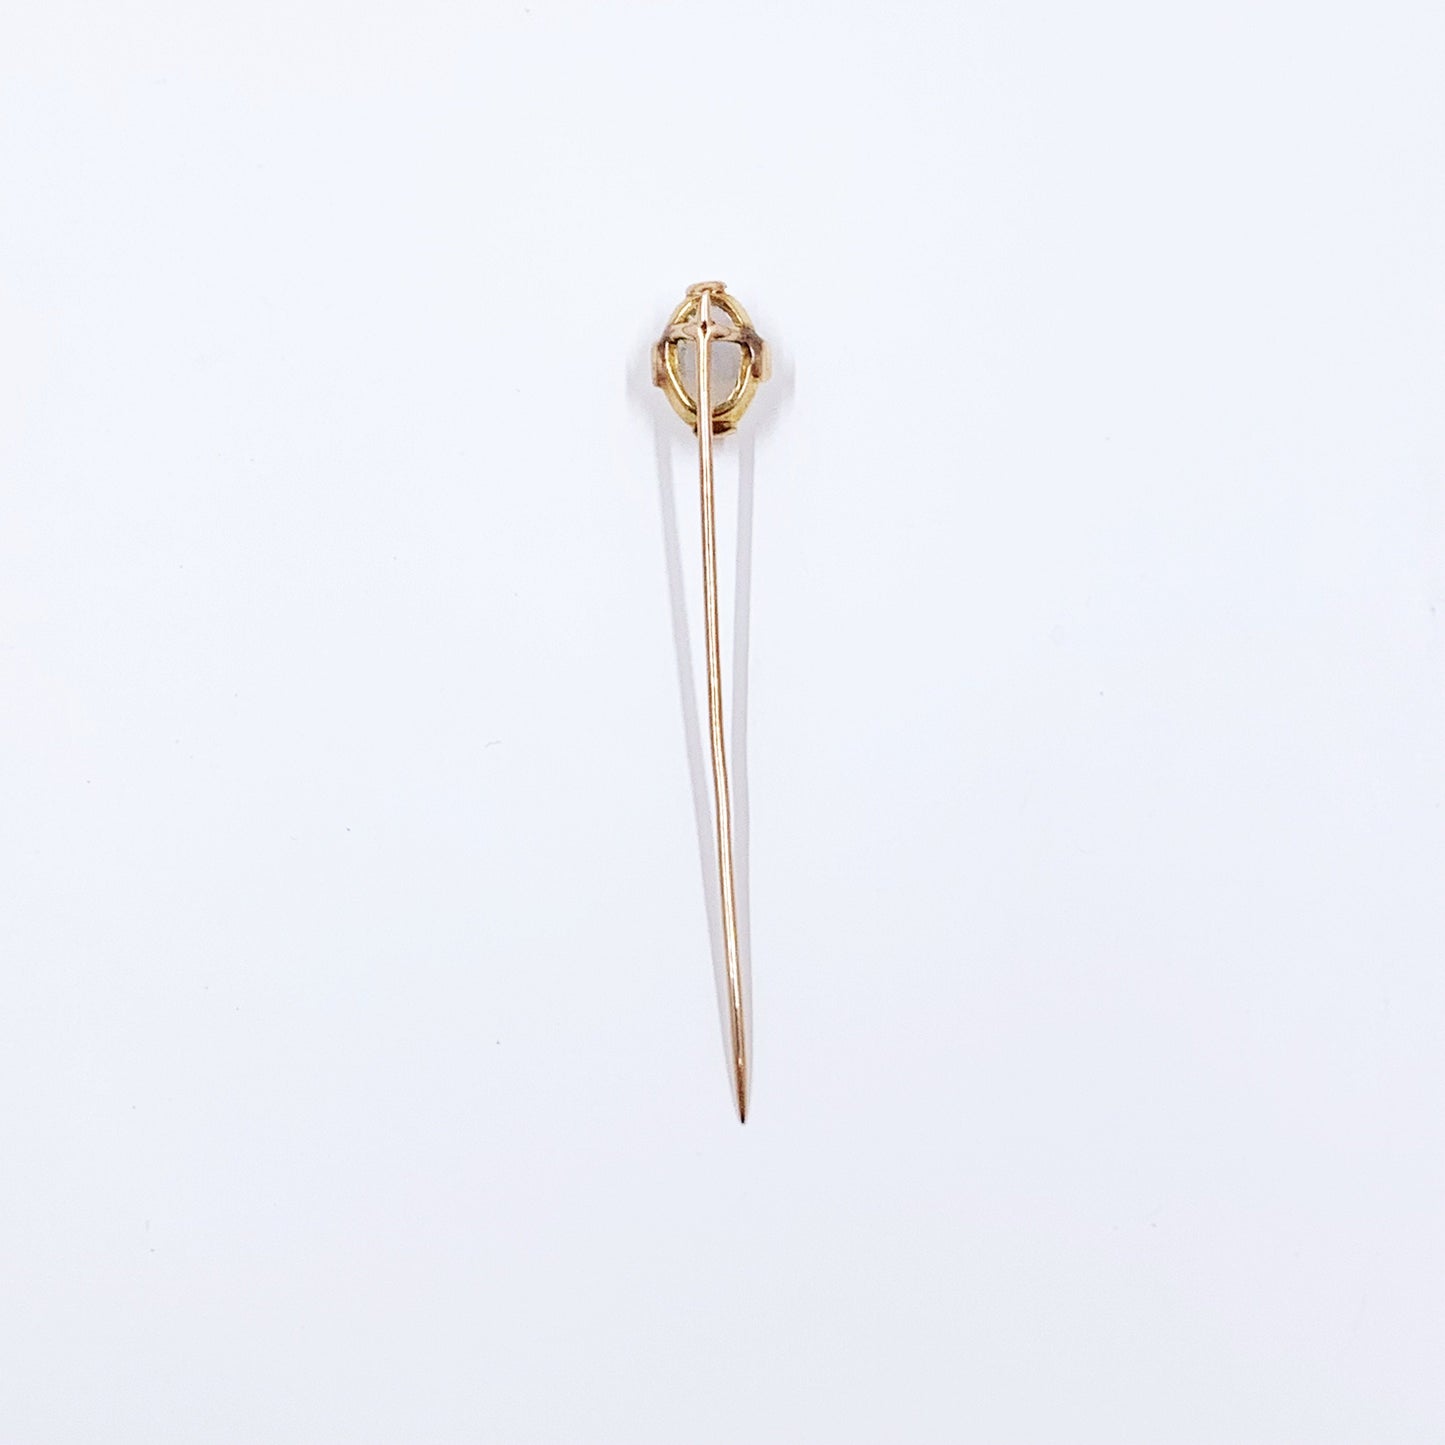 Antique Victorian 14K Gold Crystal Opal Stick Pin